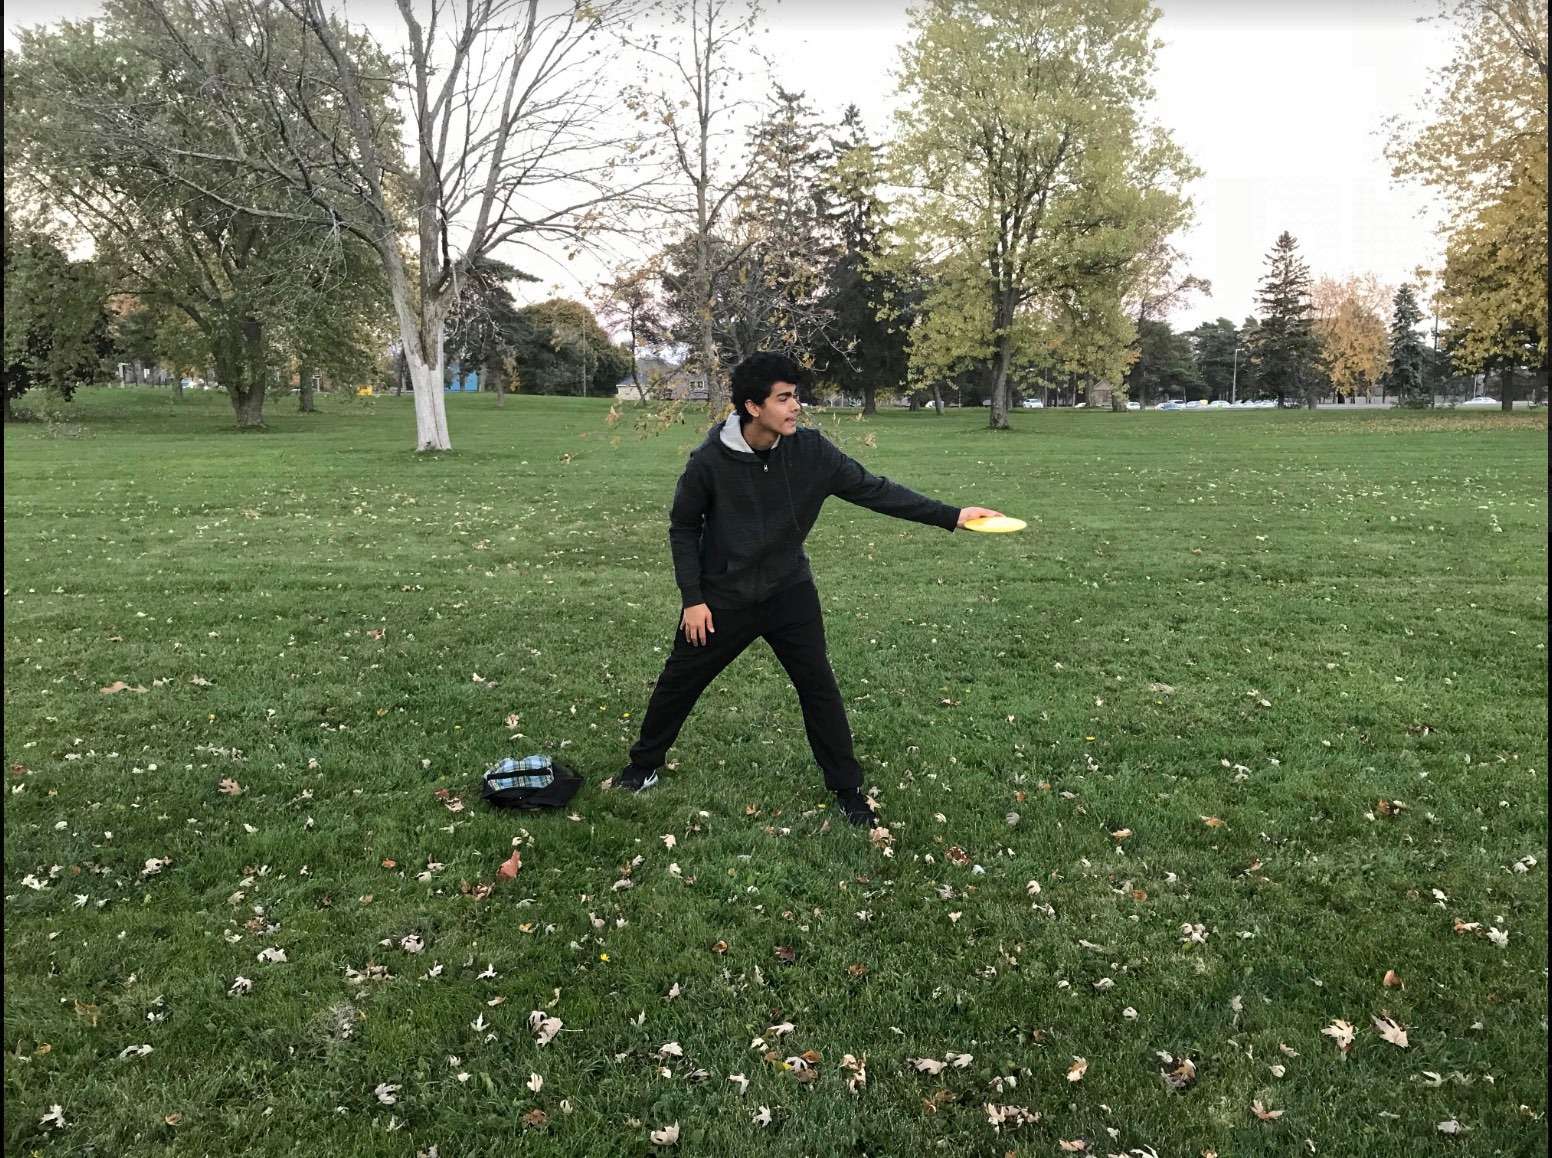 Upcoming “Learn-A-Ment” seeks to grow the game of disc golf in Kingston